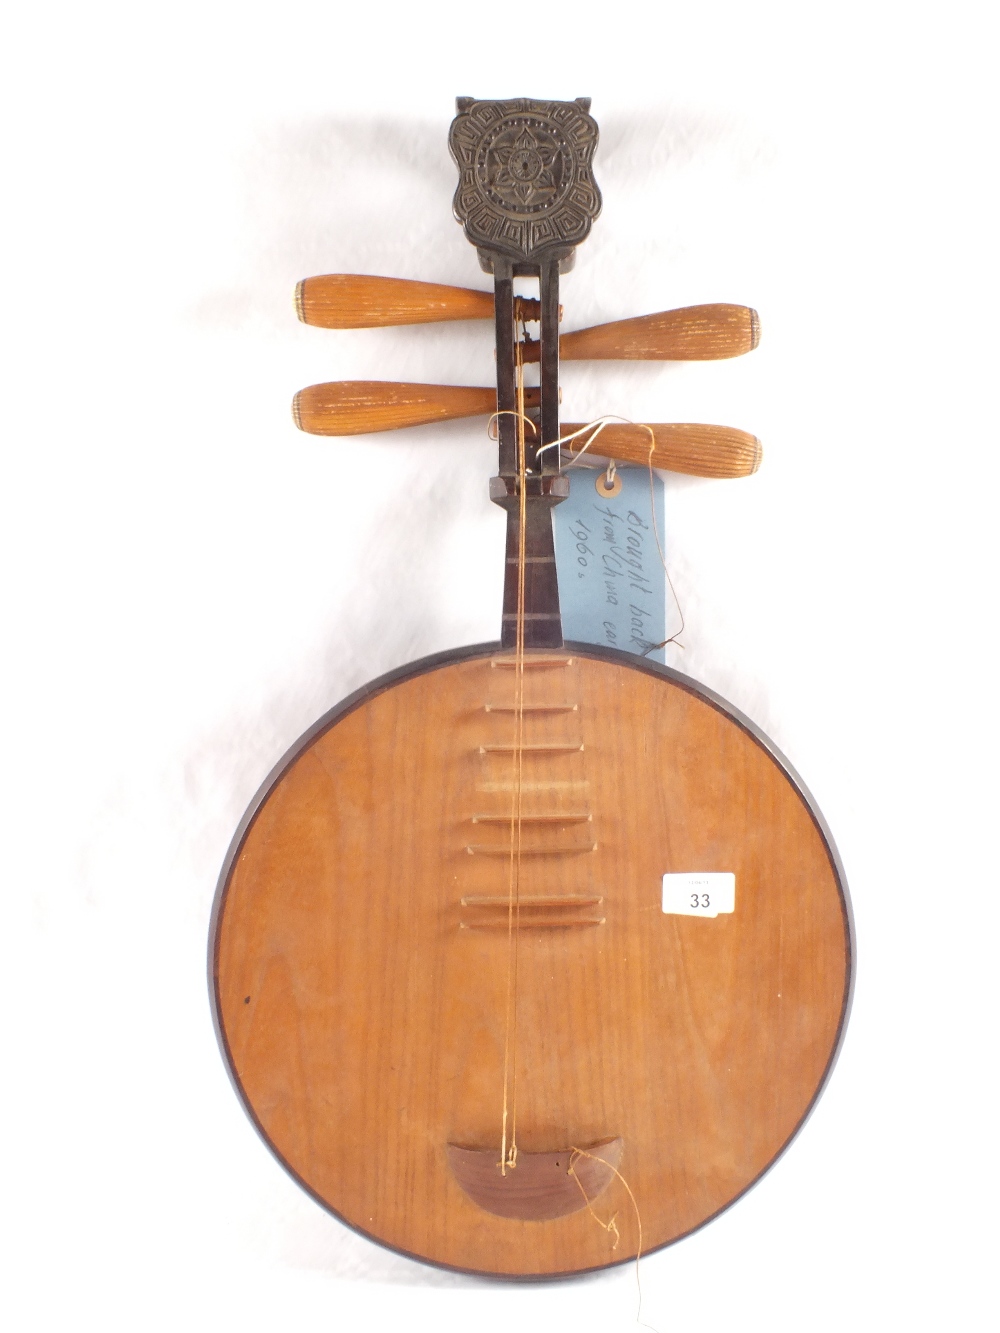 A Chinese stringed musical instrument